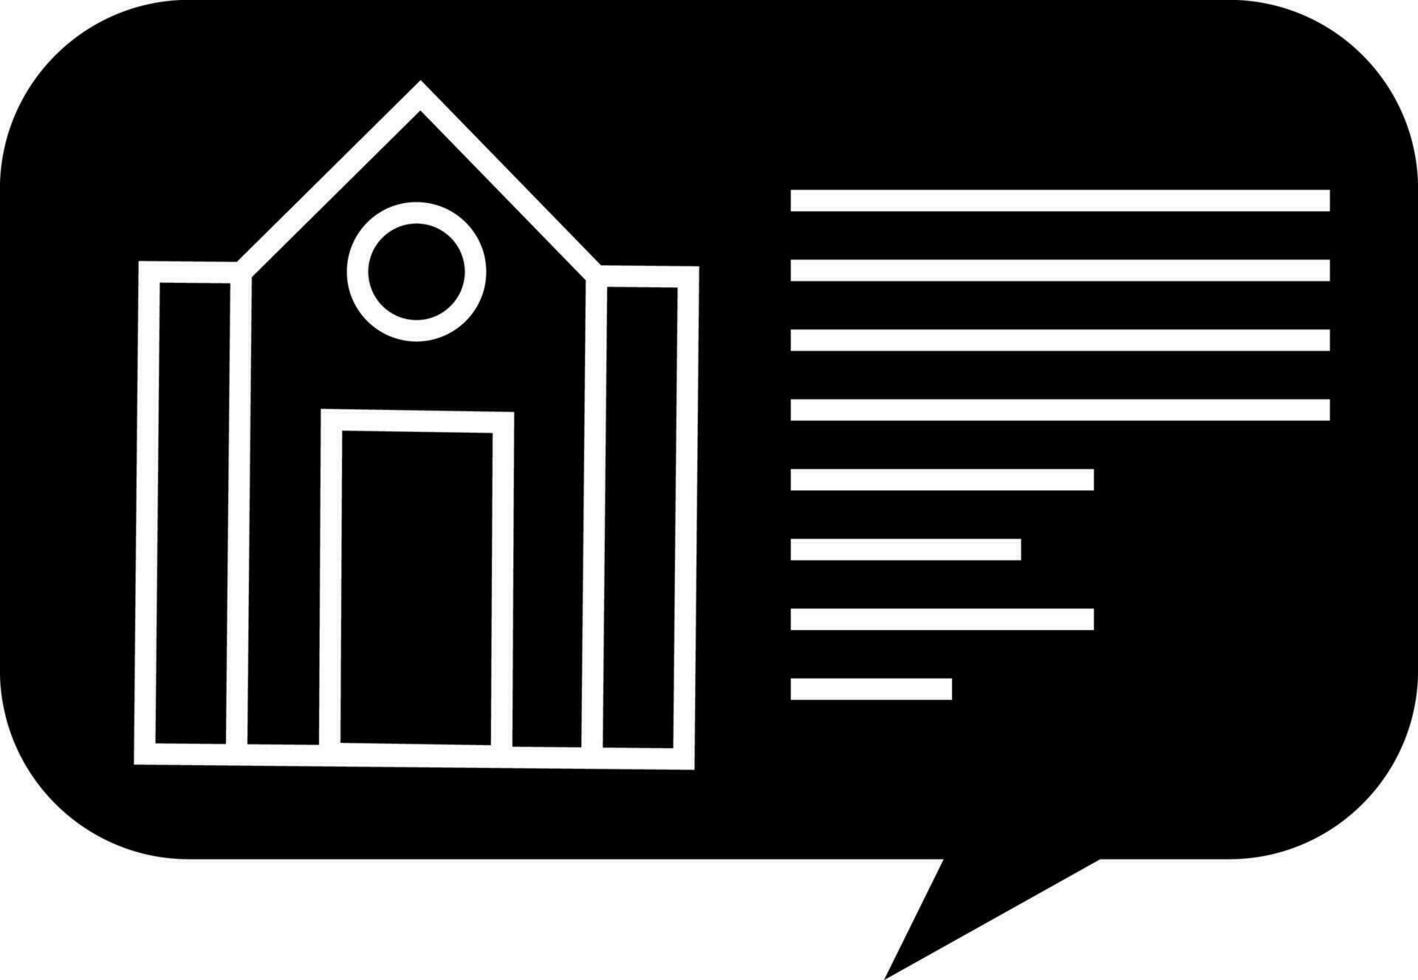 House detail or conversation icon in Black and White color. vector